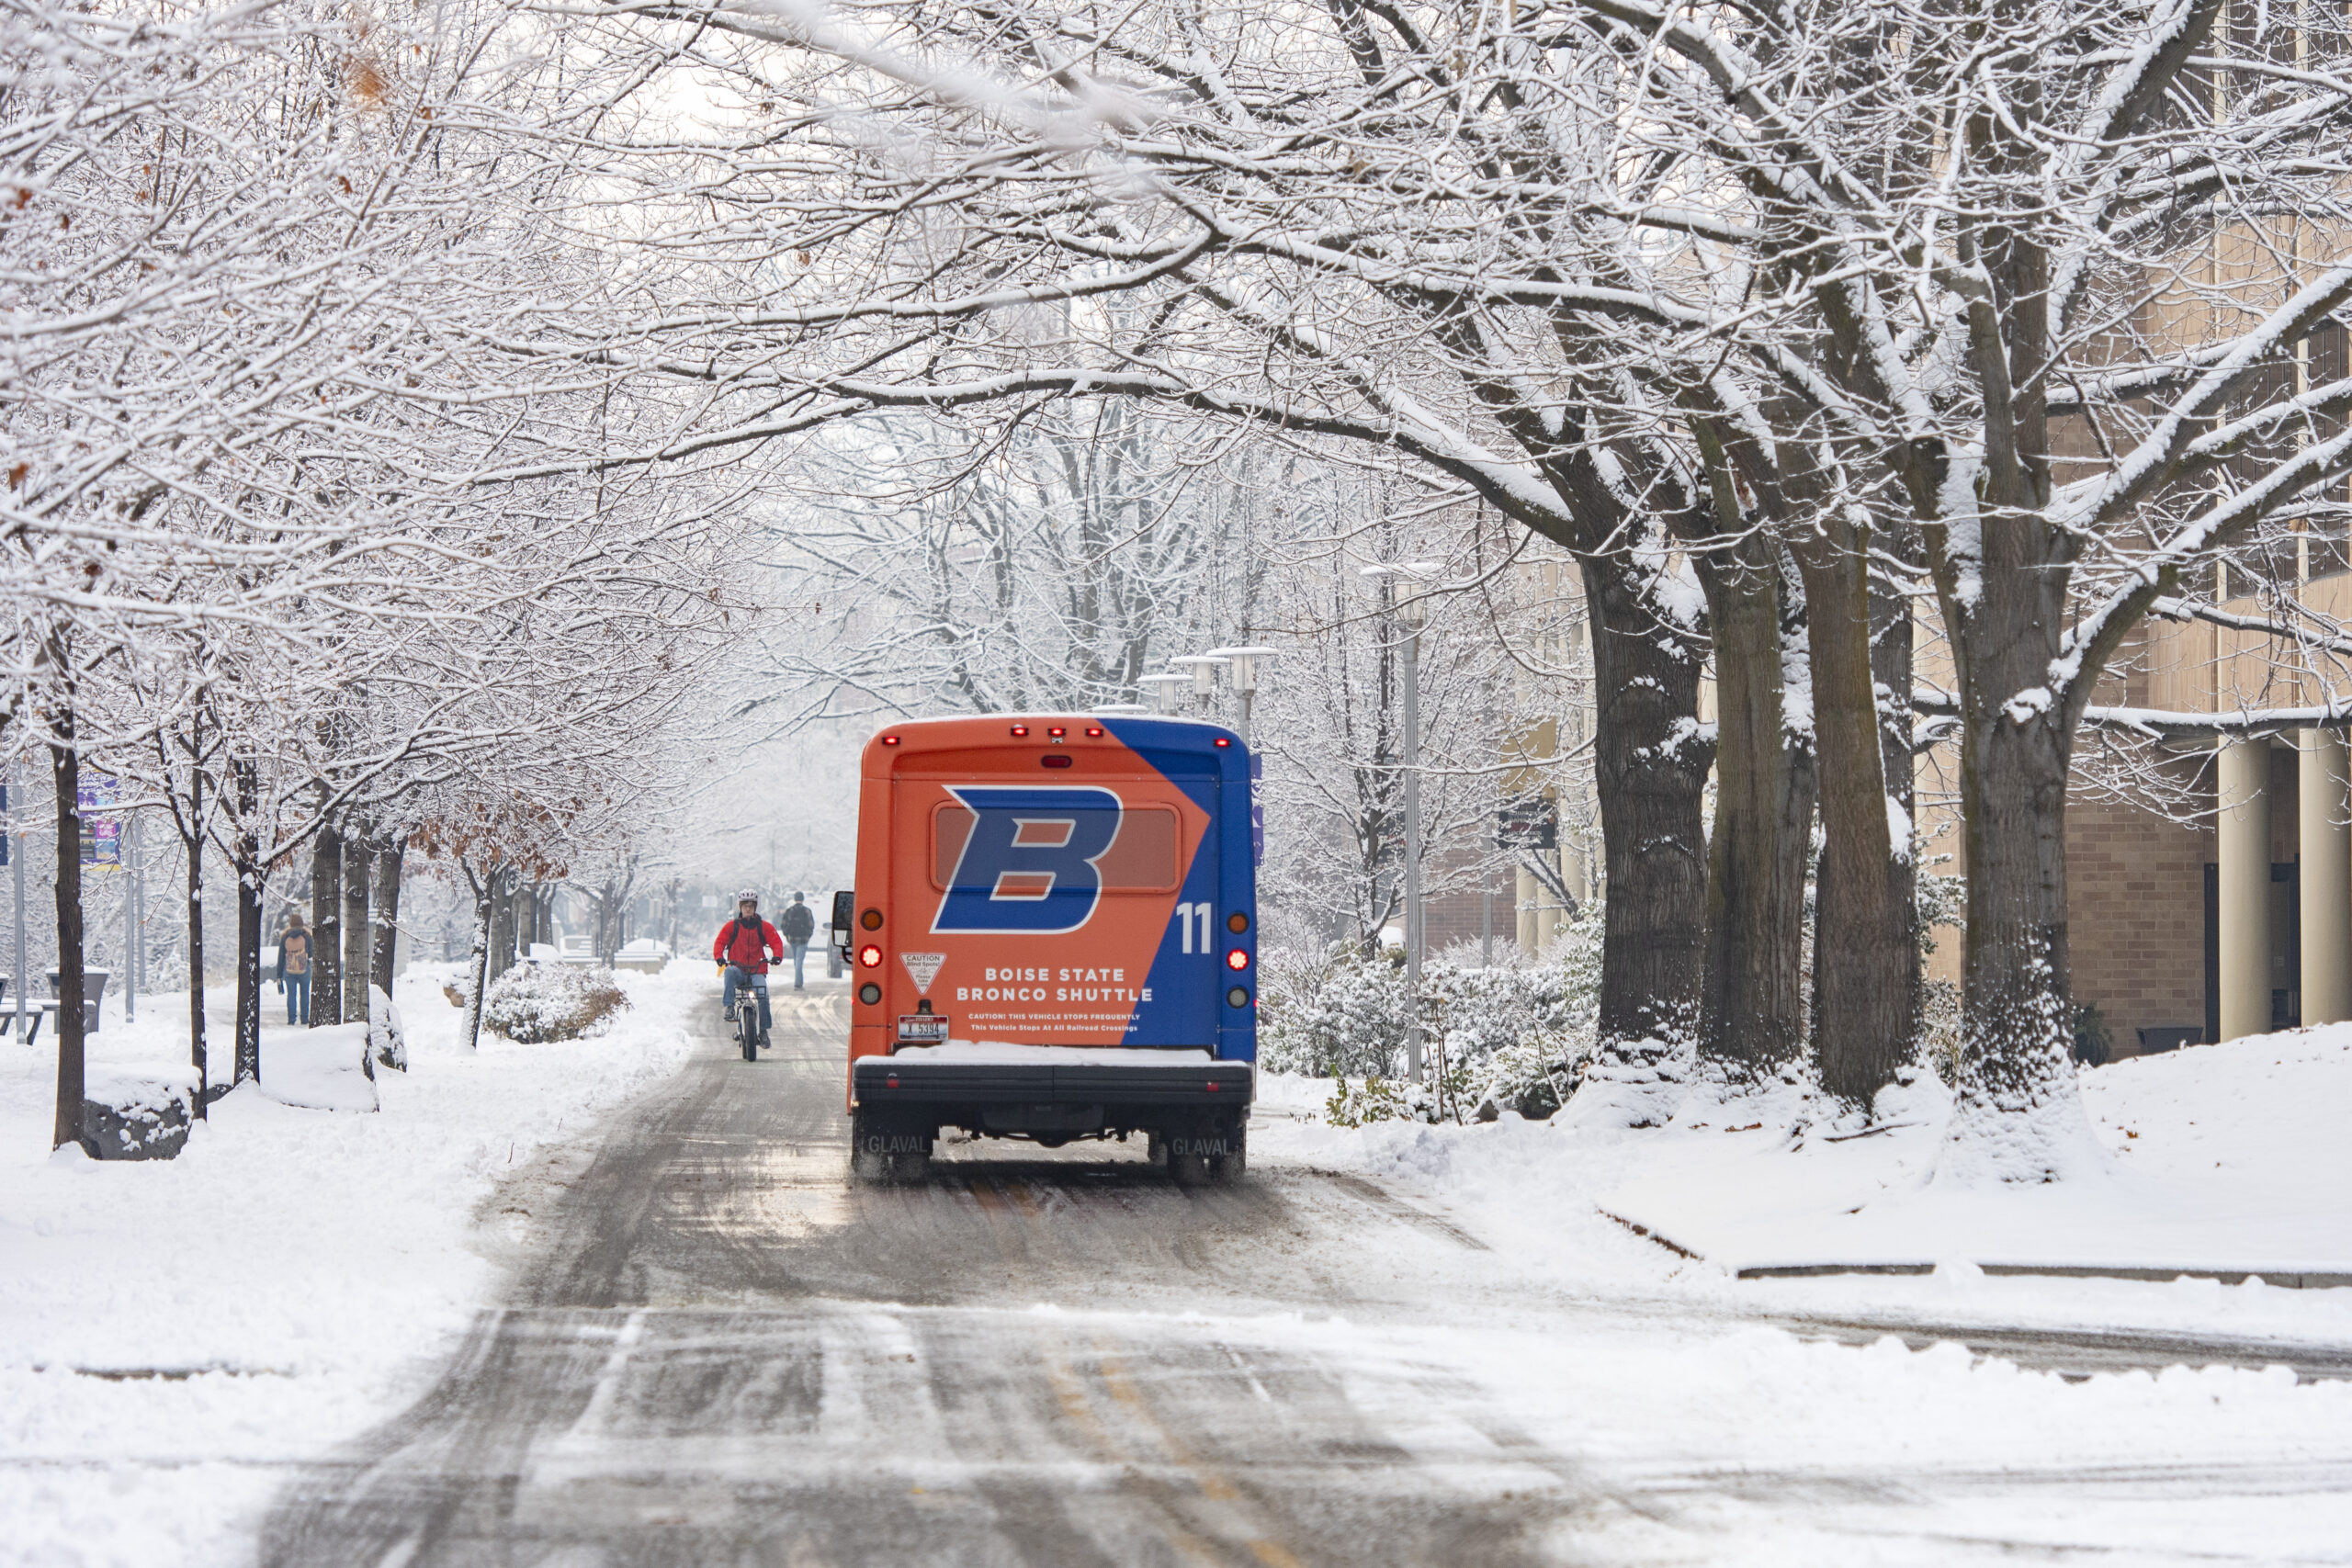 Boise State shuttle driving on campus during winter 2023